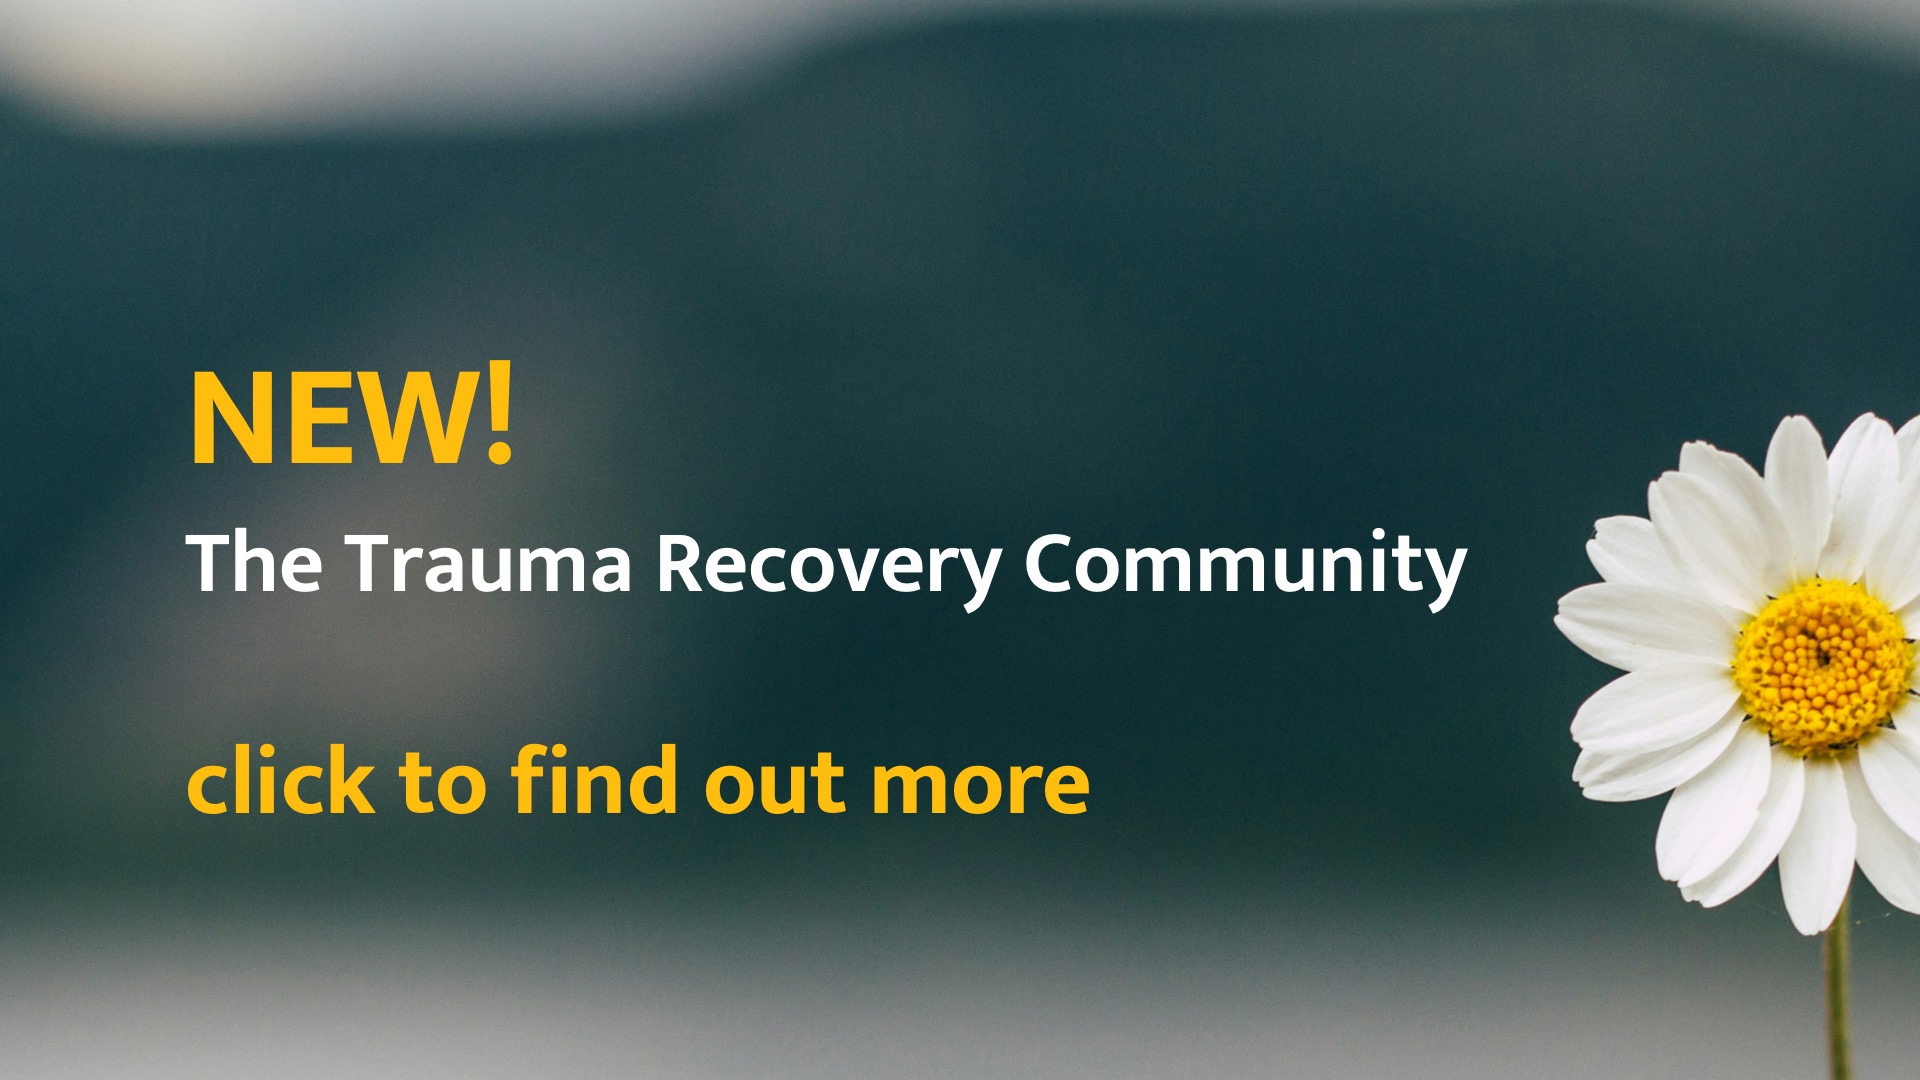 NEW! The Trauma Recovery Community. Click to find out more.